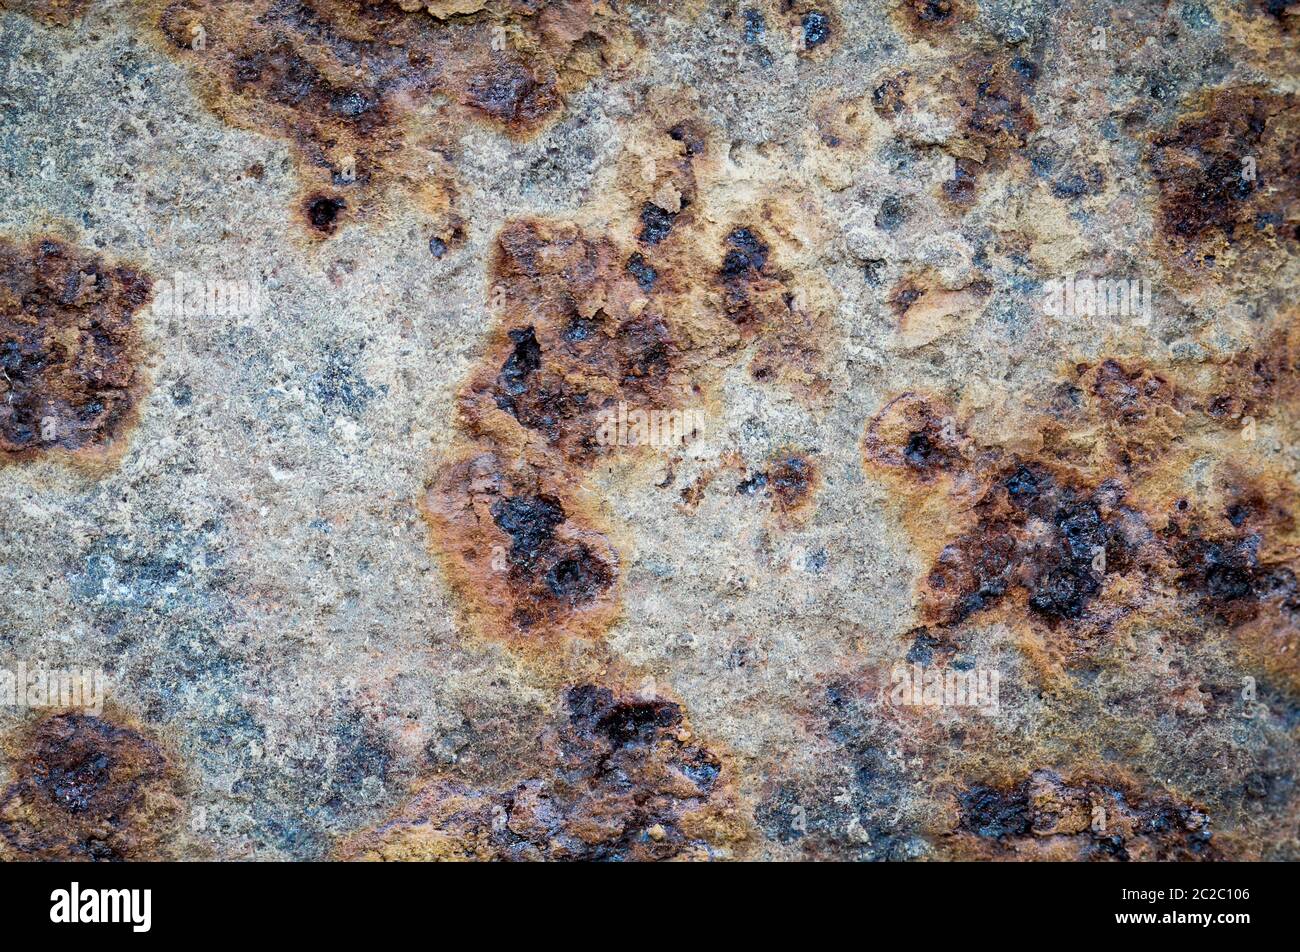 Rusty metal texture with paint residues and rust spots Stock Photo